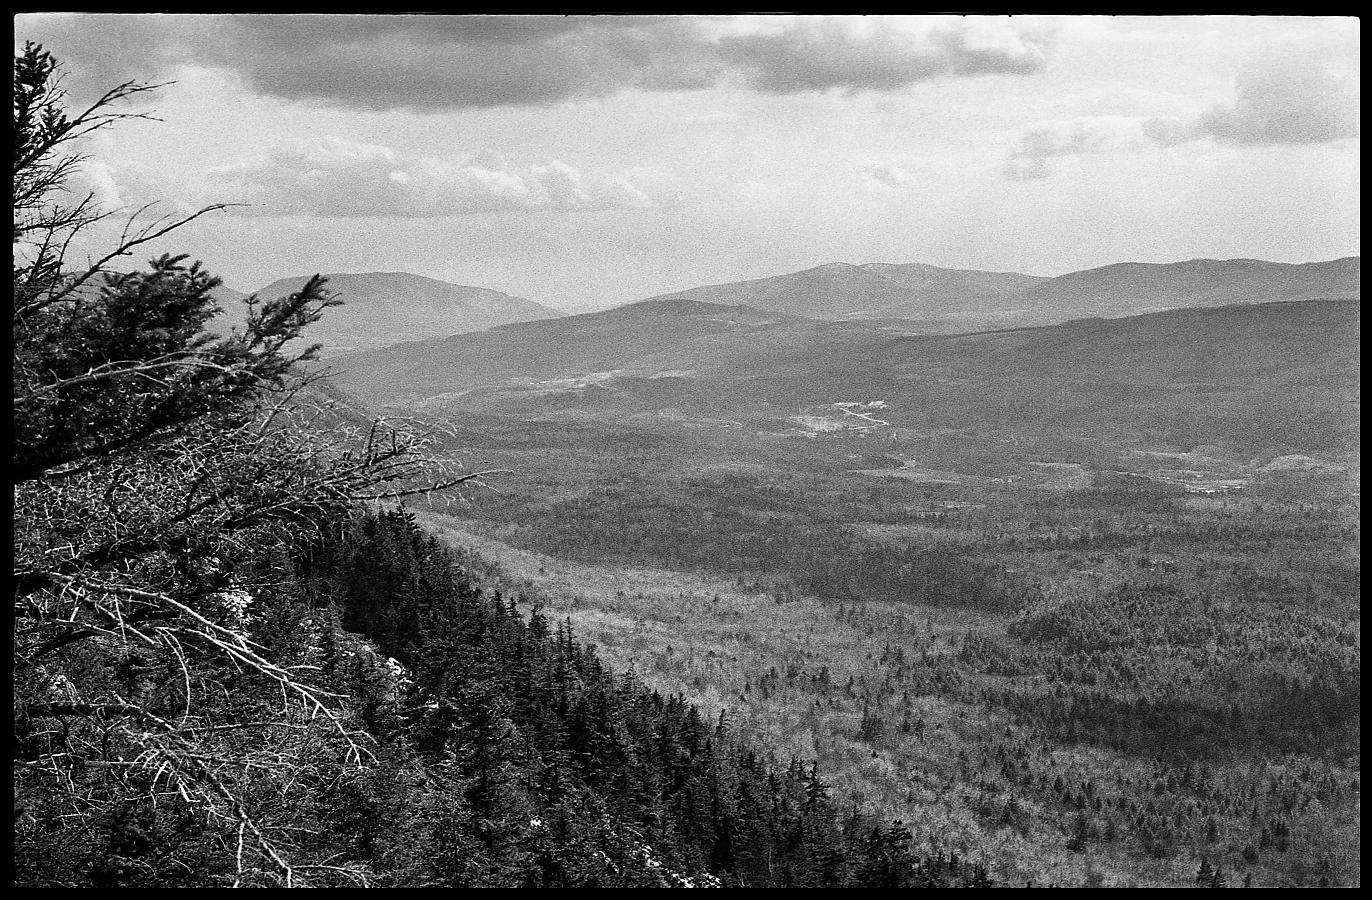 08a.jpg - It was a beautiful spring day.  We climbed over the ice beds and took a break at the base of the cliff, looking out over the valley.  This is a view looking south toward Massachussetts and New York.